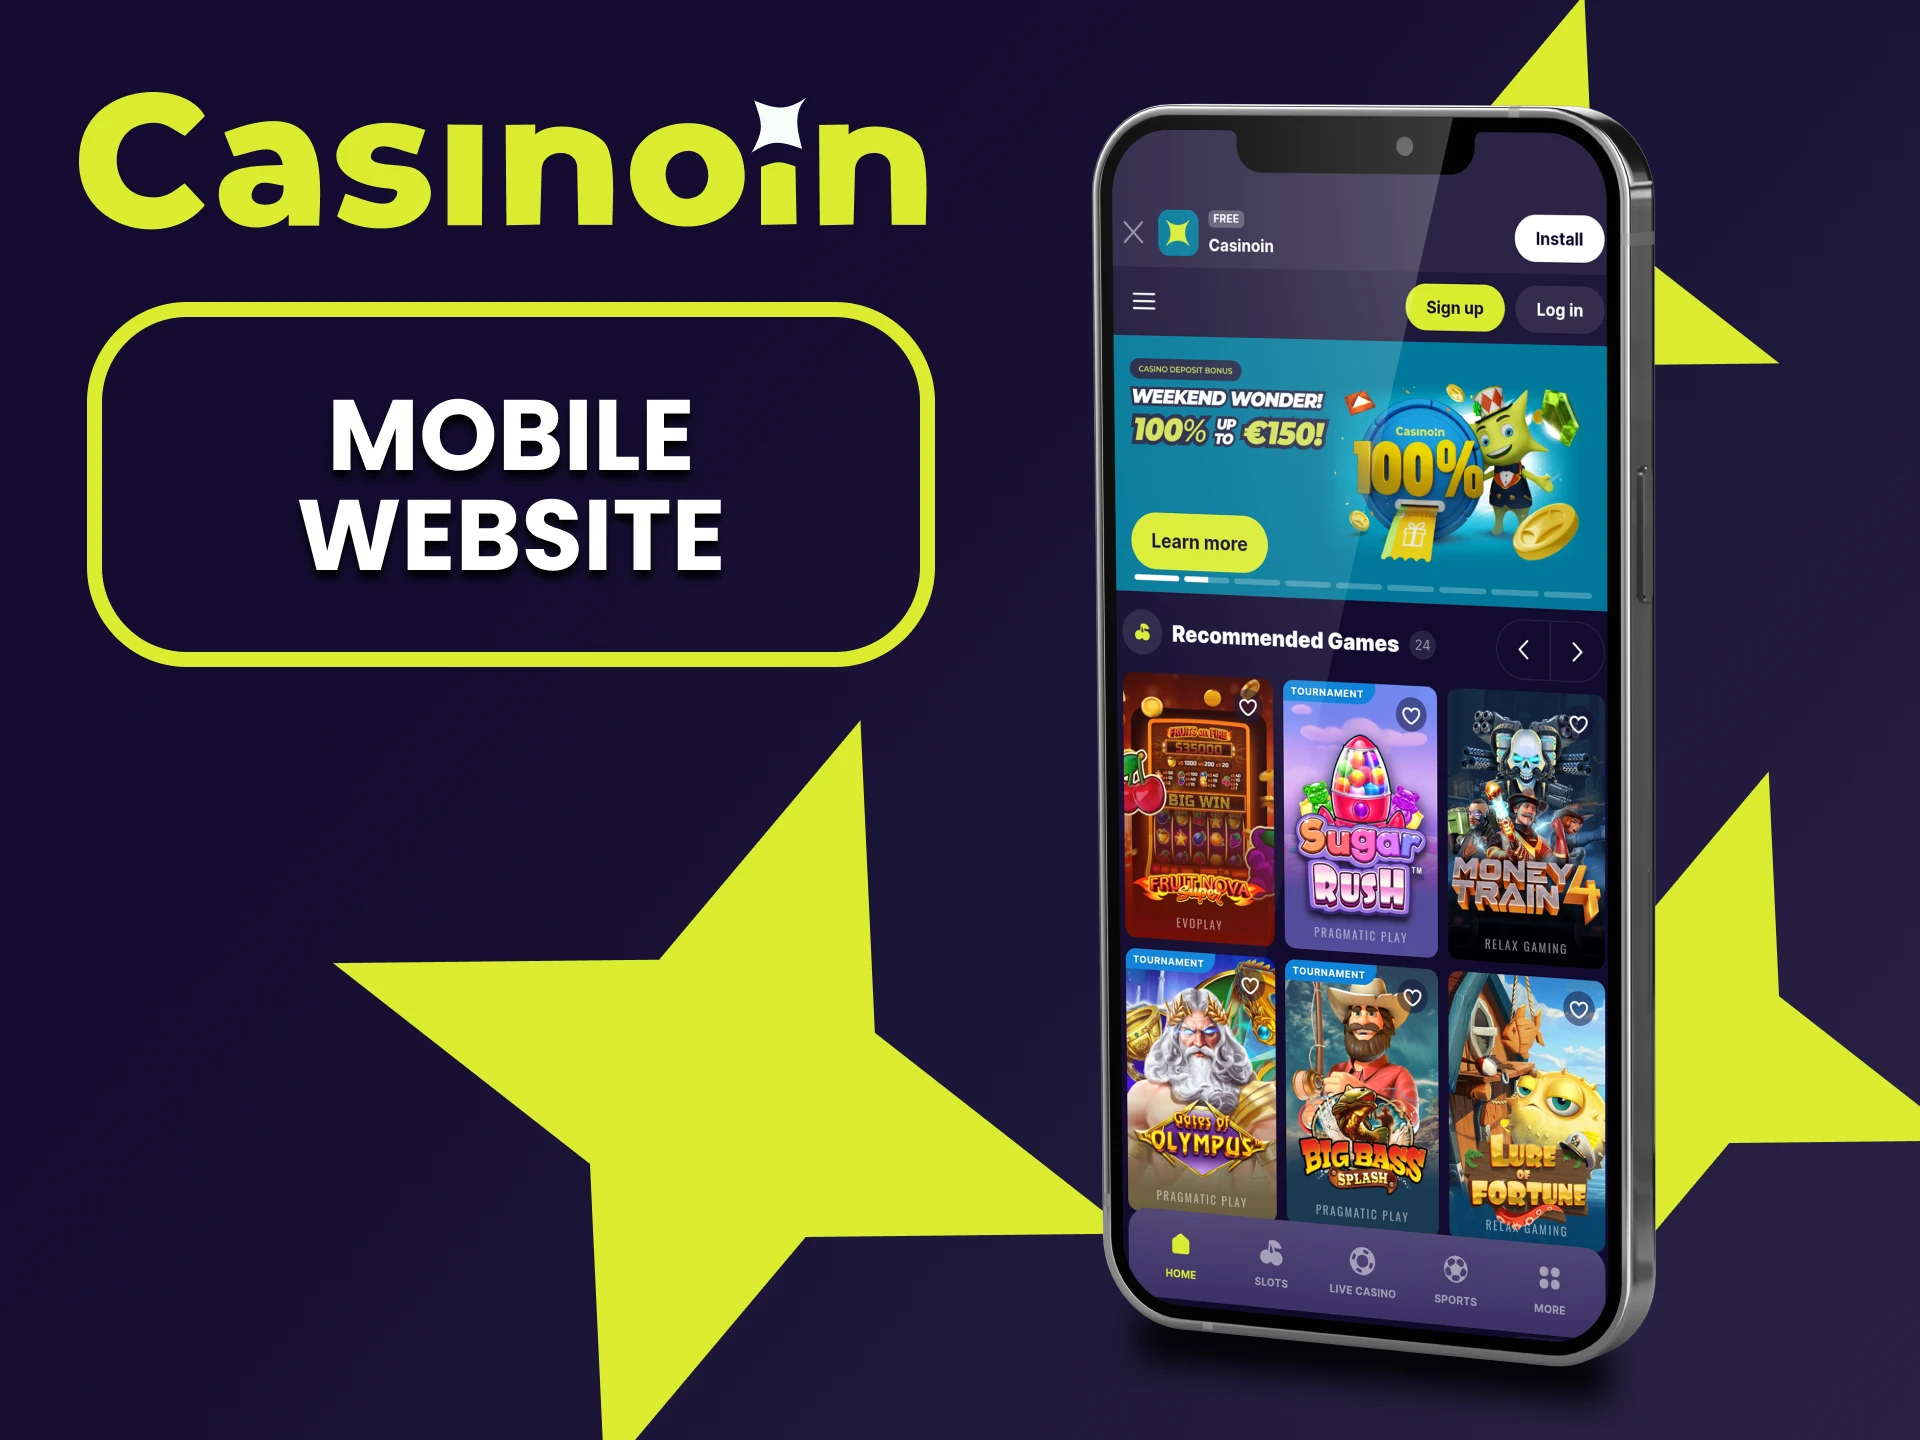 Visit the mobile version of the Casinoin website.